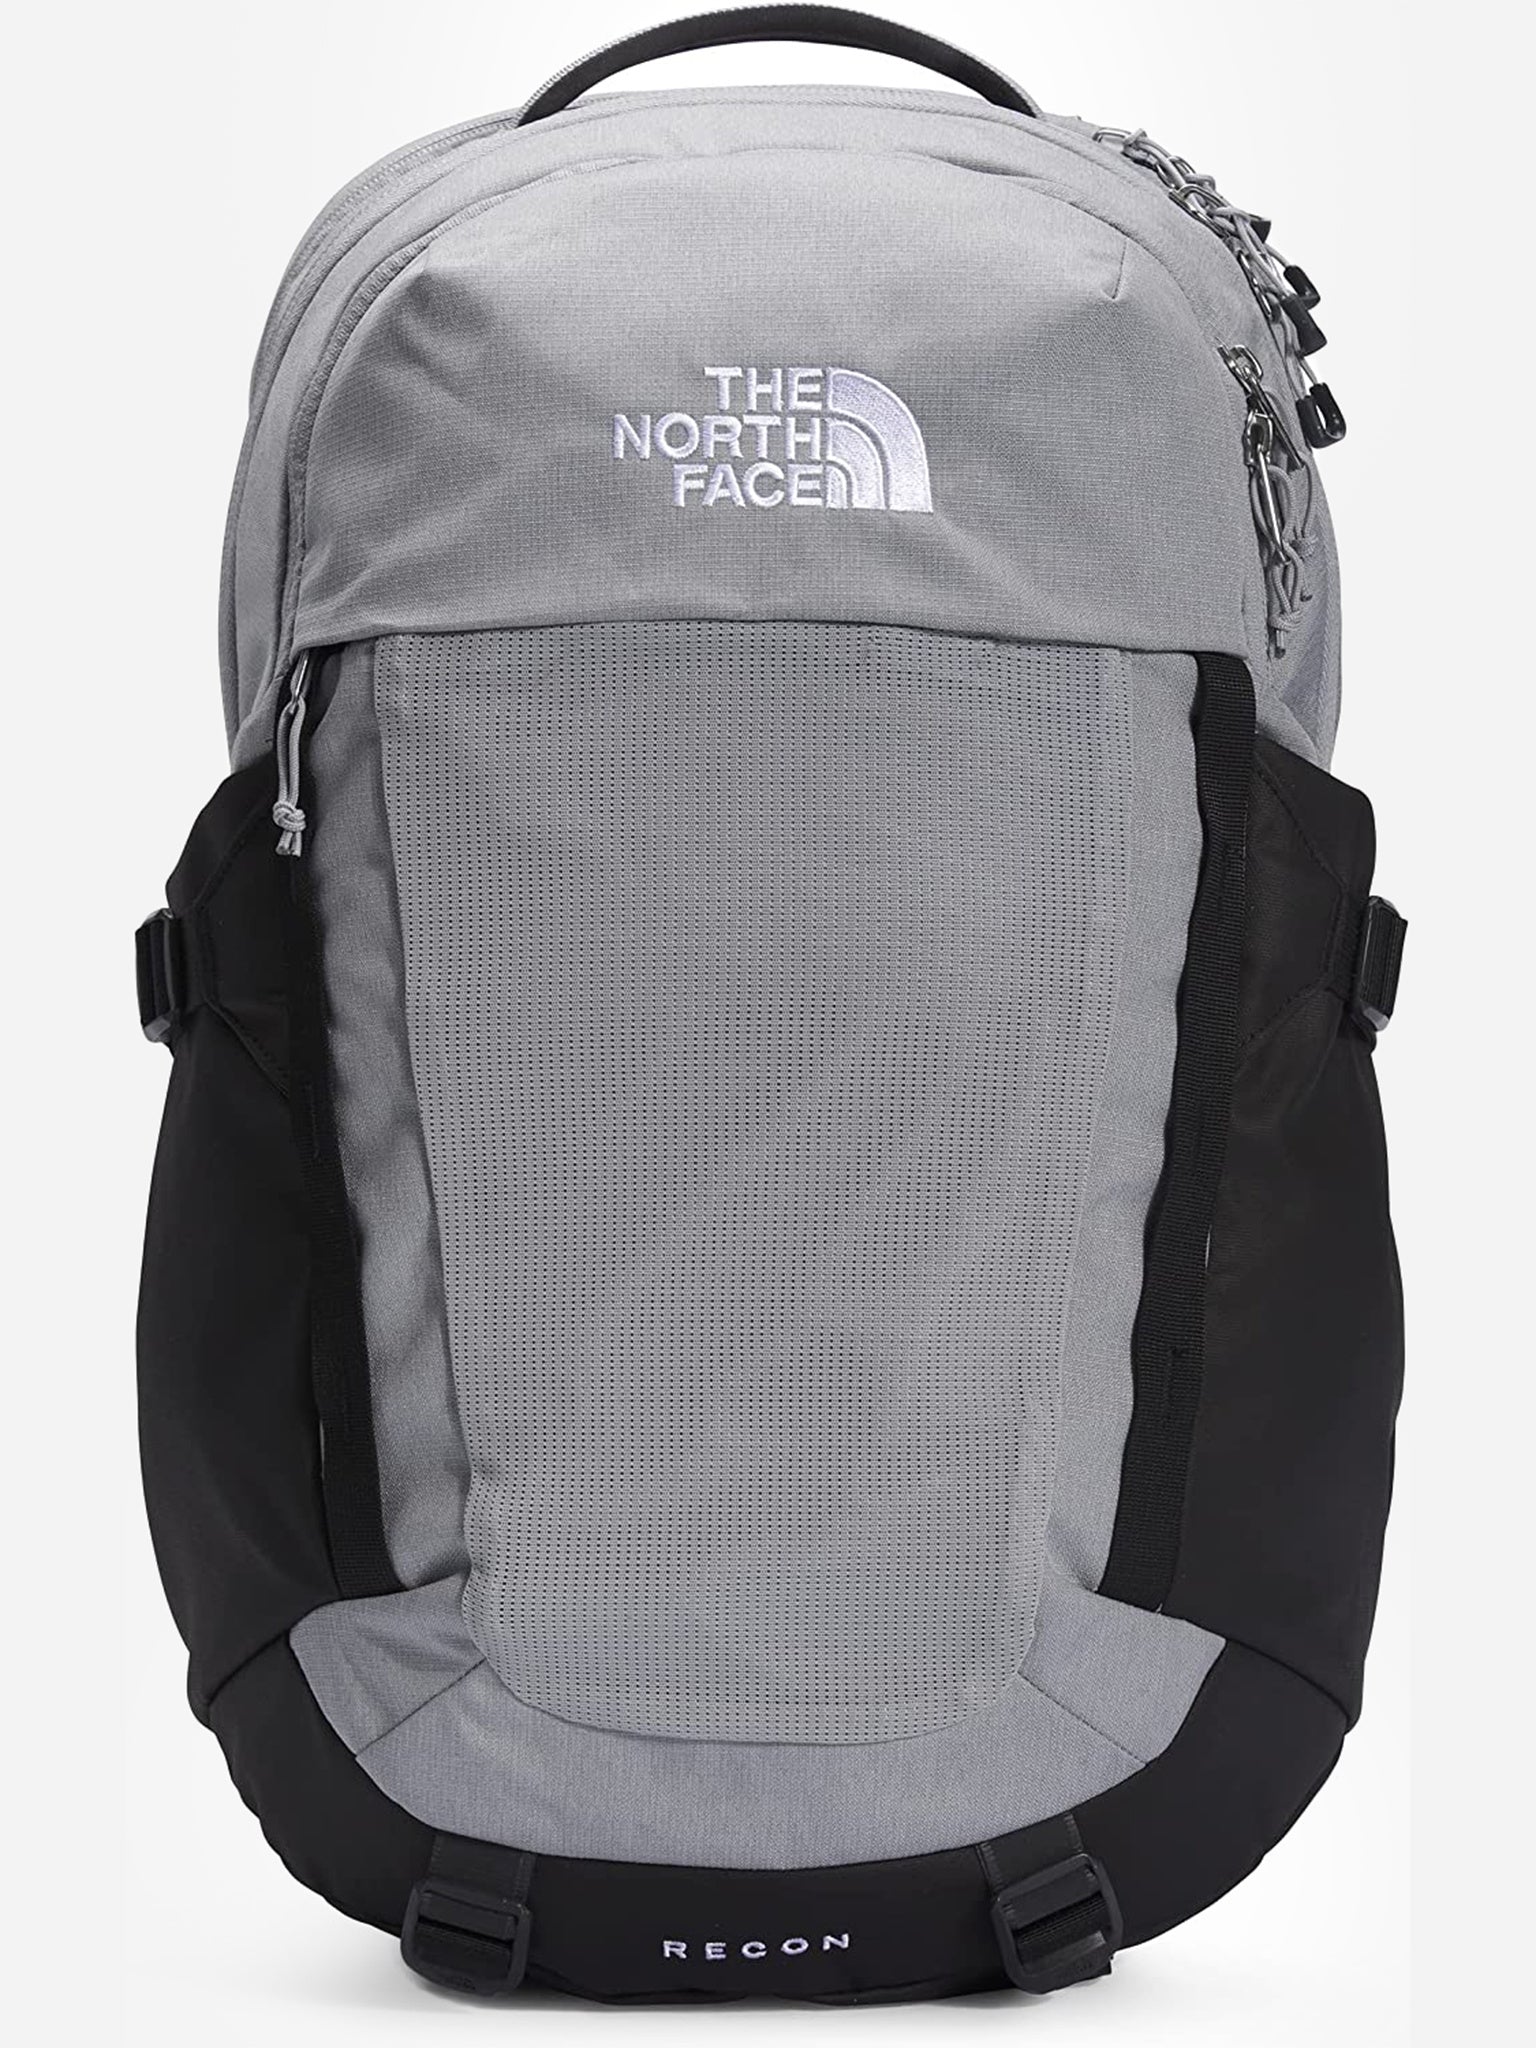 Thuisland bout lager The North Face Recon Backpack - Saint Bernard